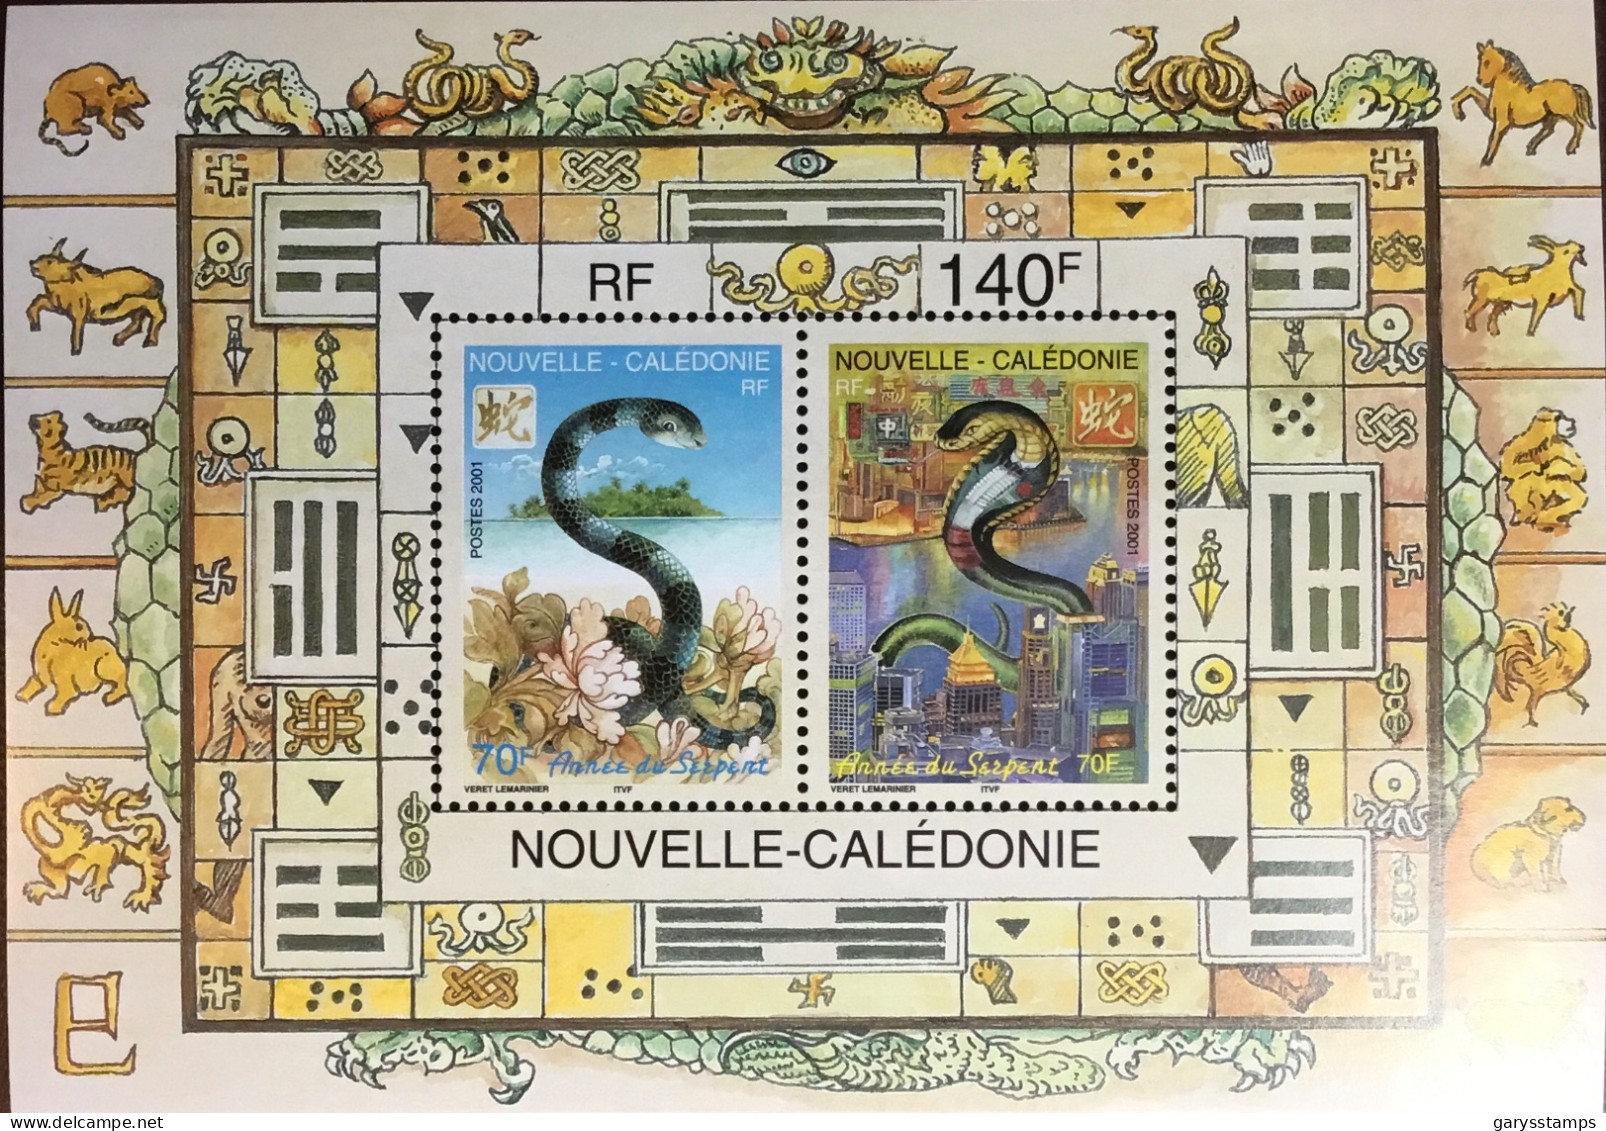 New Caledonia Caledonie 2001 Year Of The Snake Sheetlet MNH - Serpents